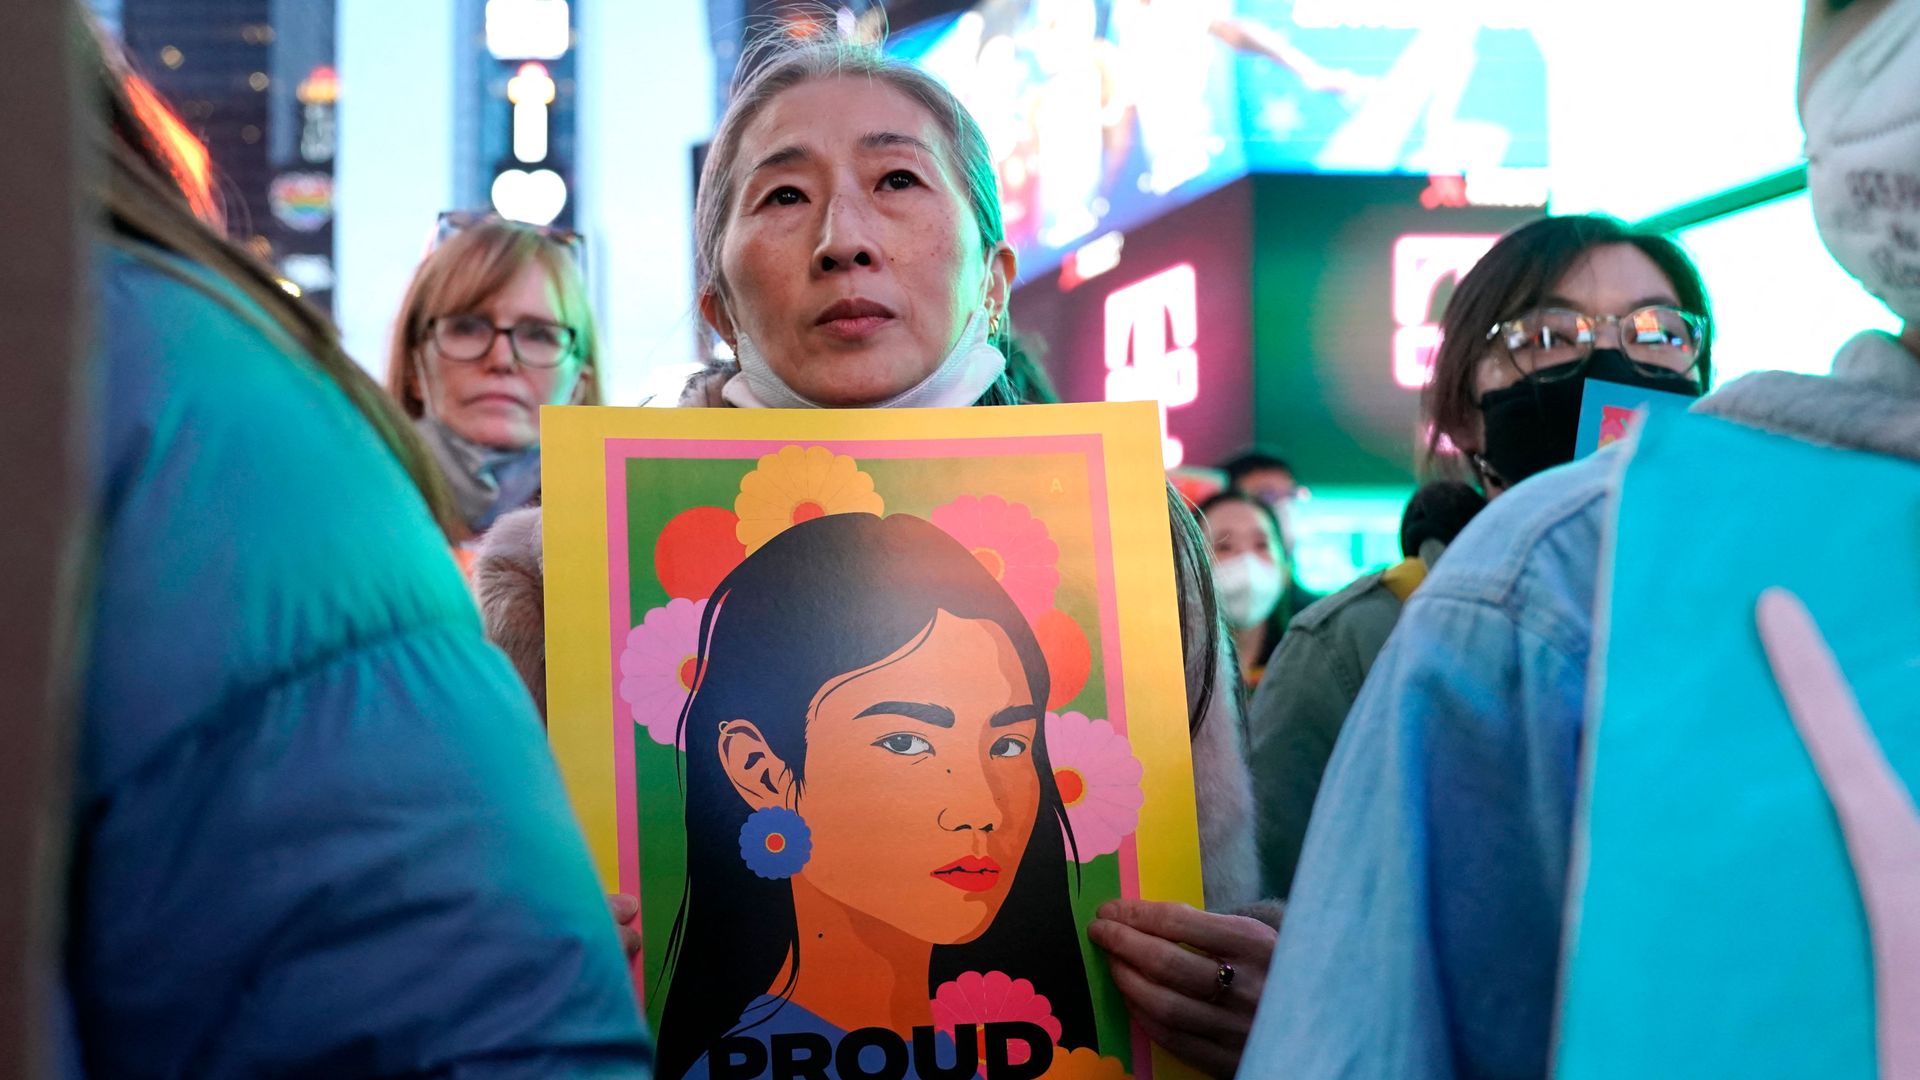 Photo of a person holding a sign showing an Asian woman, with the words "Proud to be Asian"